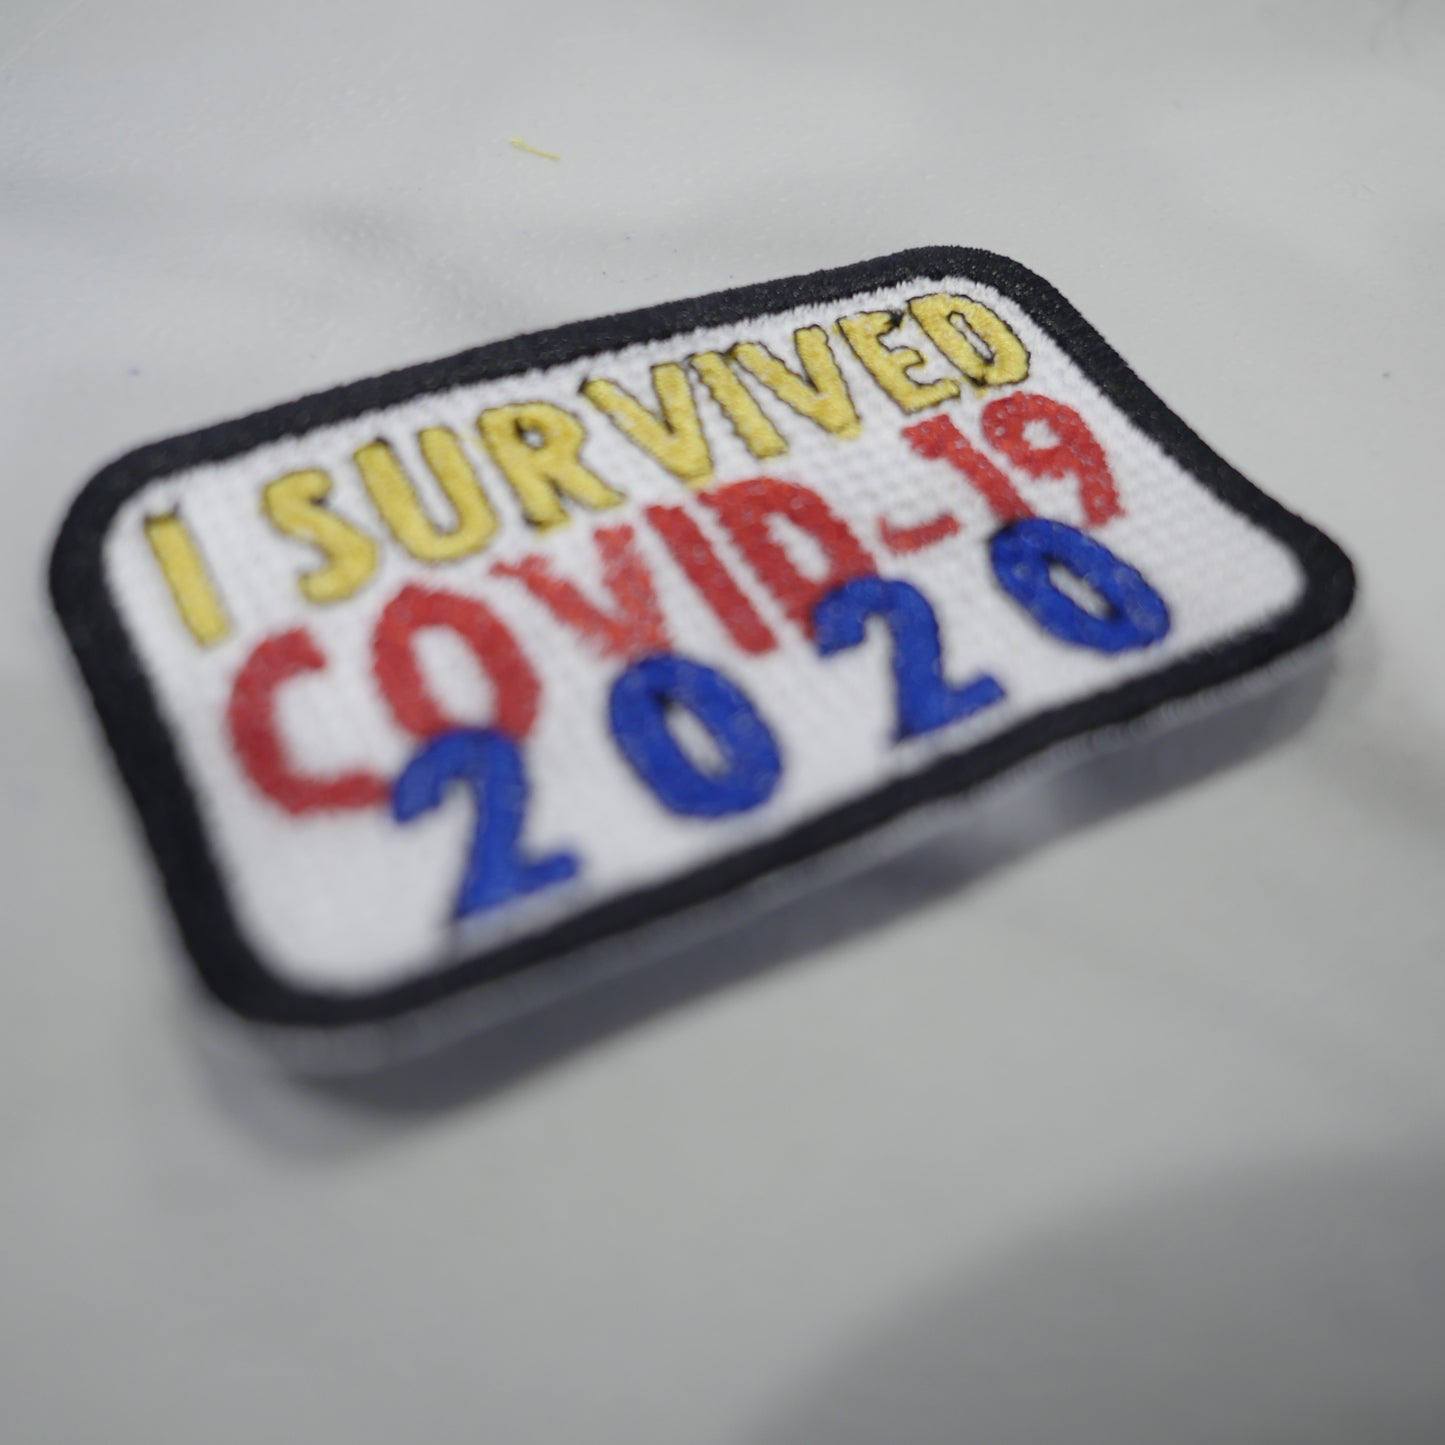 Iron on I Survived Covid-19 2020 Embroidery Patch